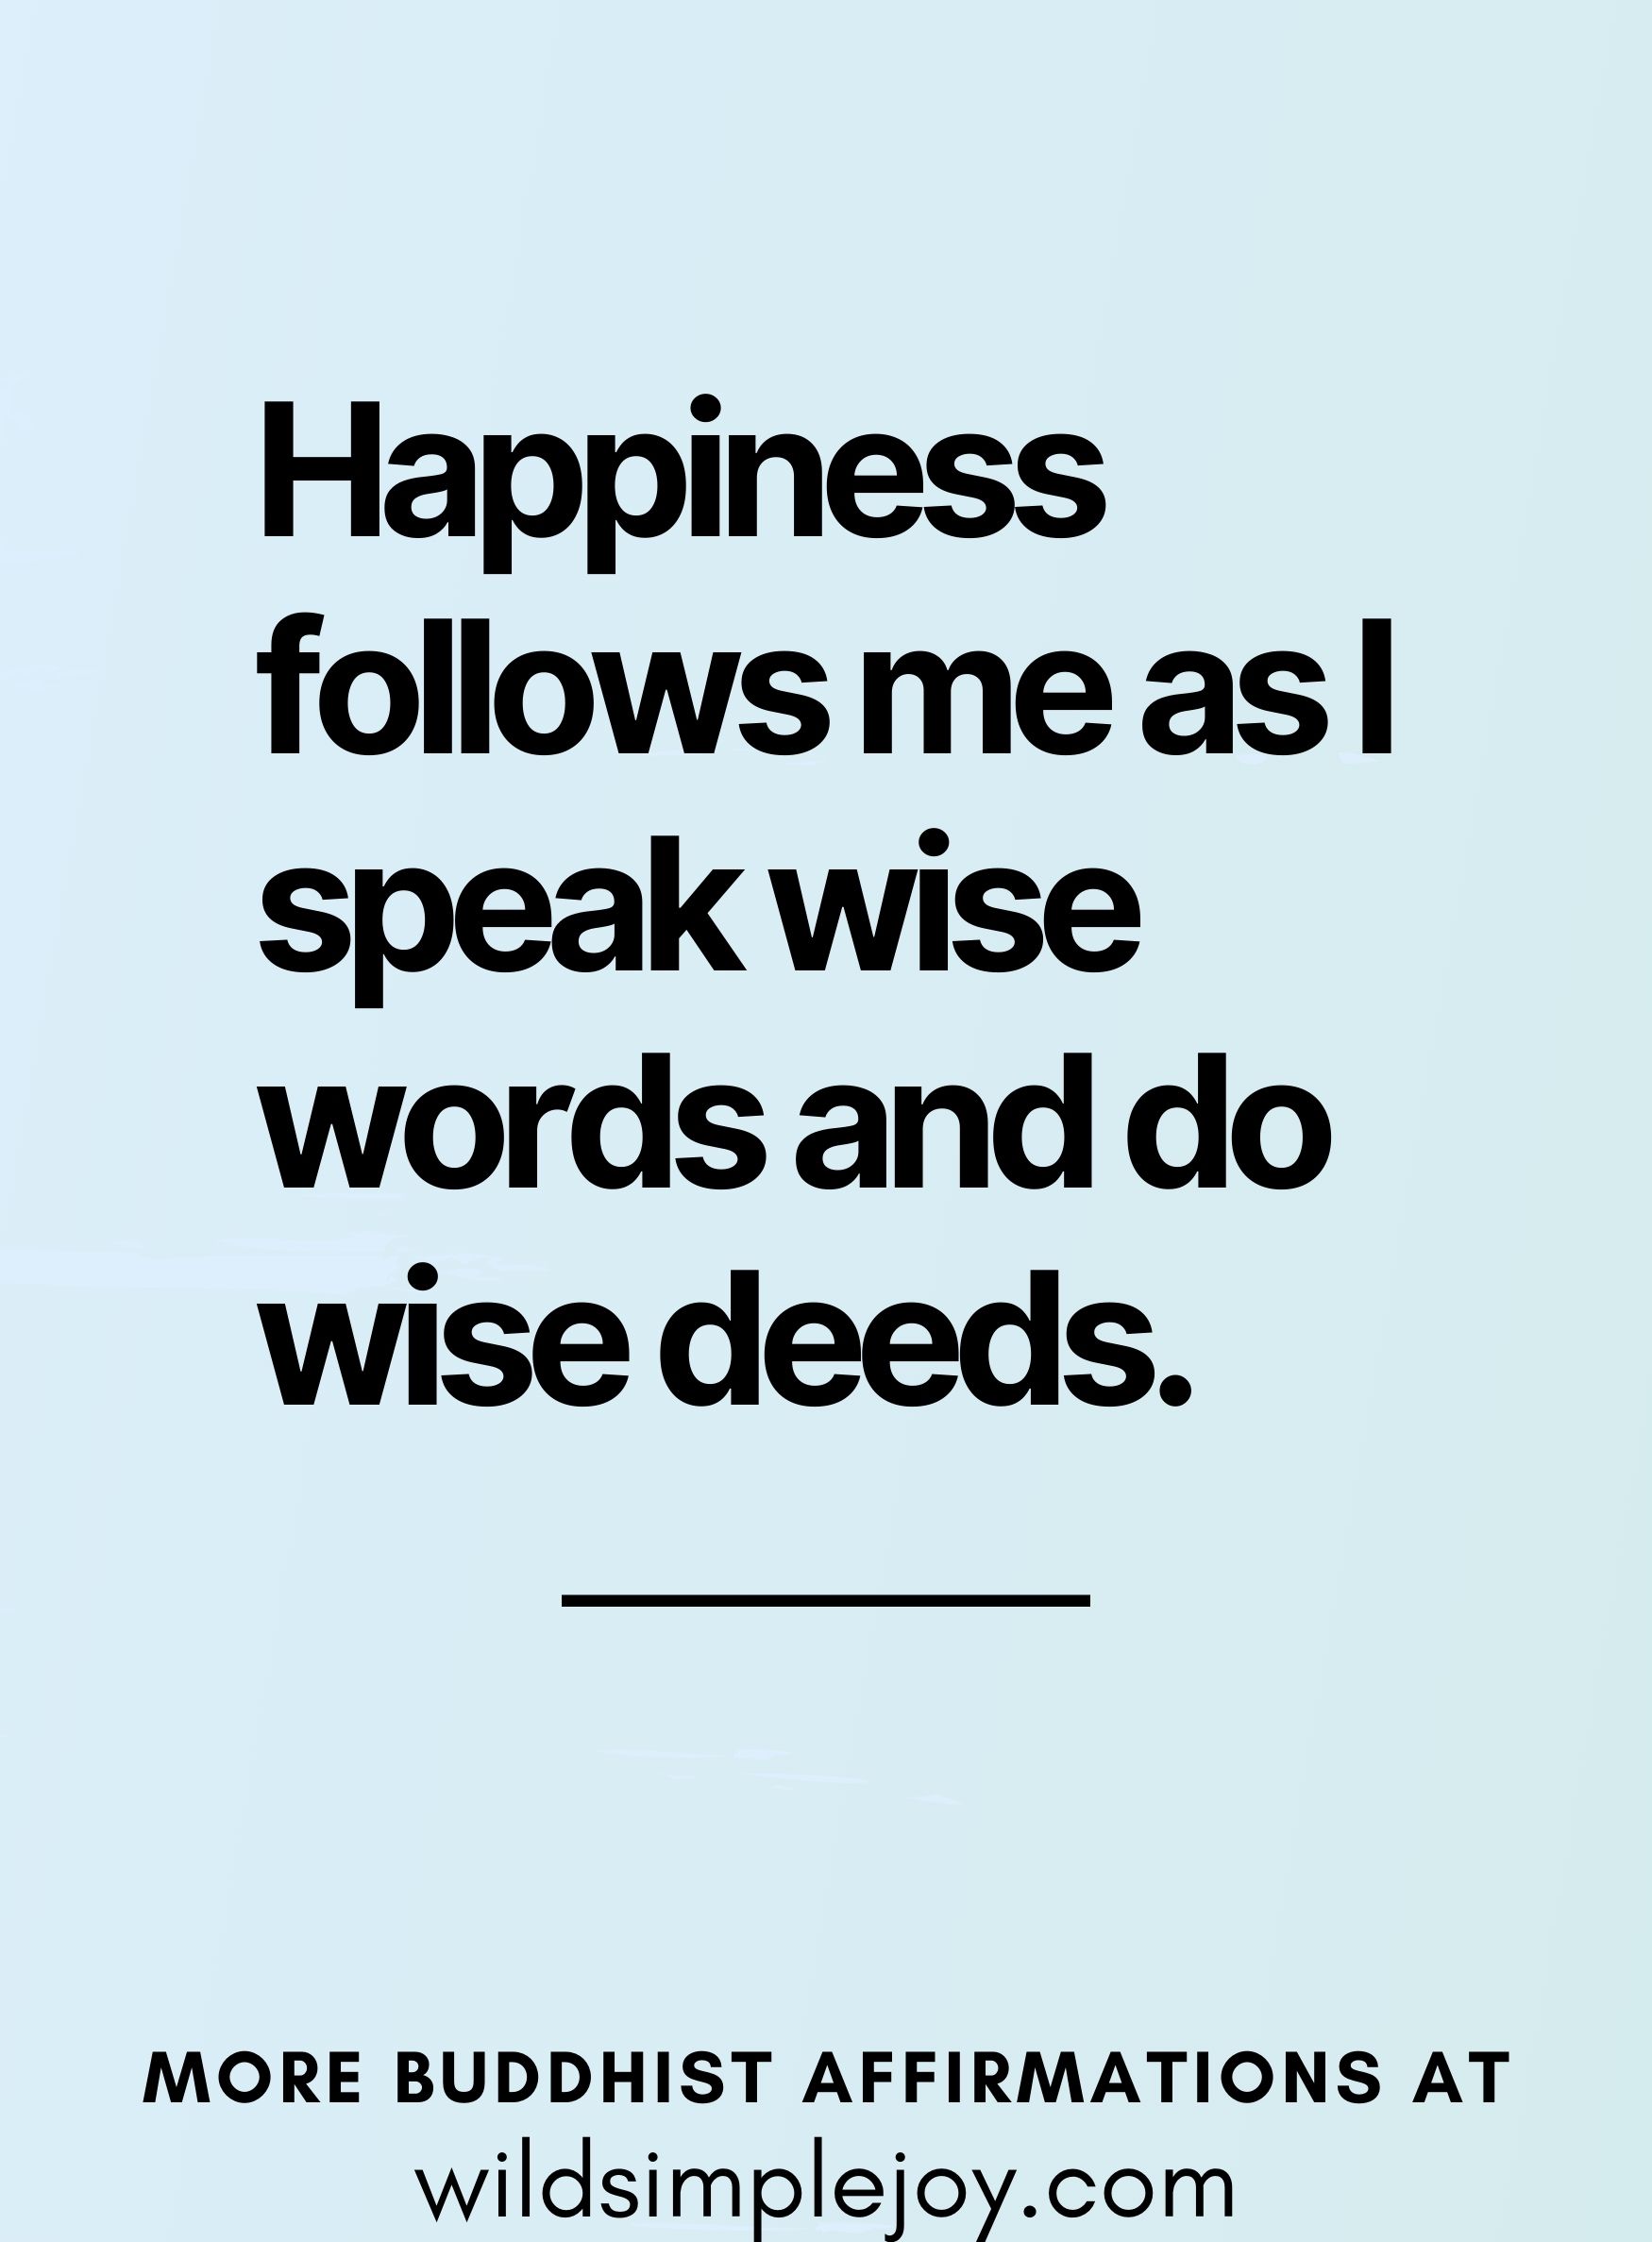 Happiness follows me as I speak wise words and do wise deeds. (based on Buddha teaching, on a blue and green background)